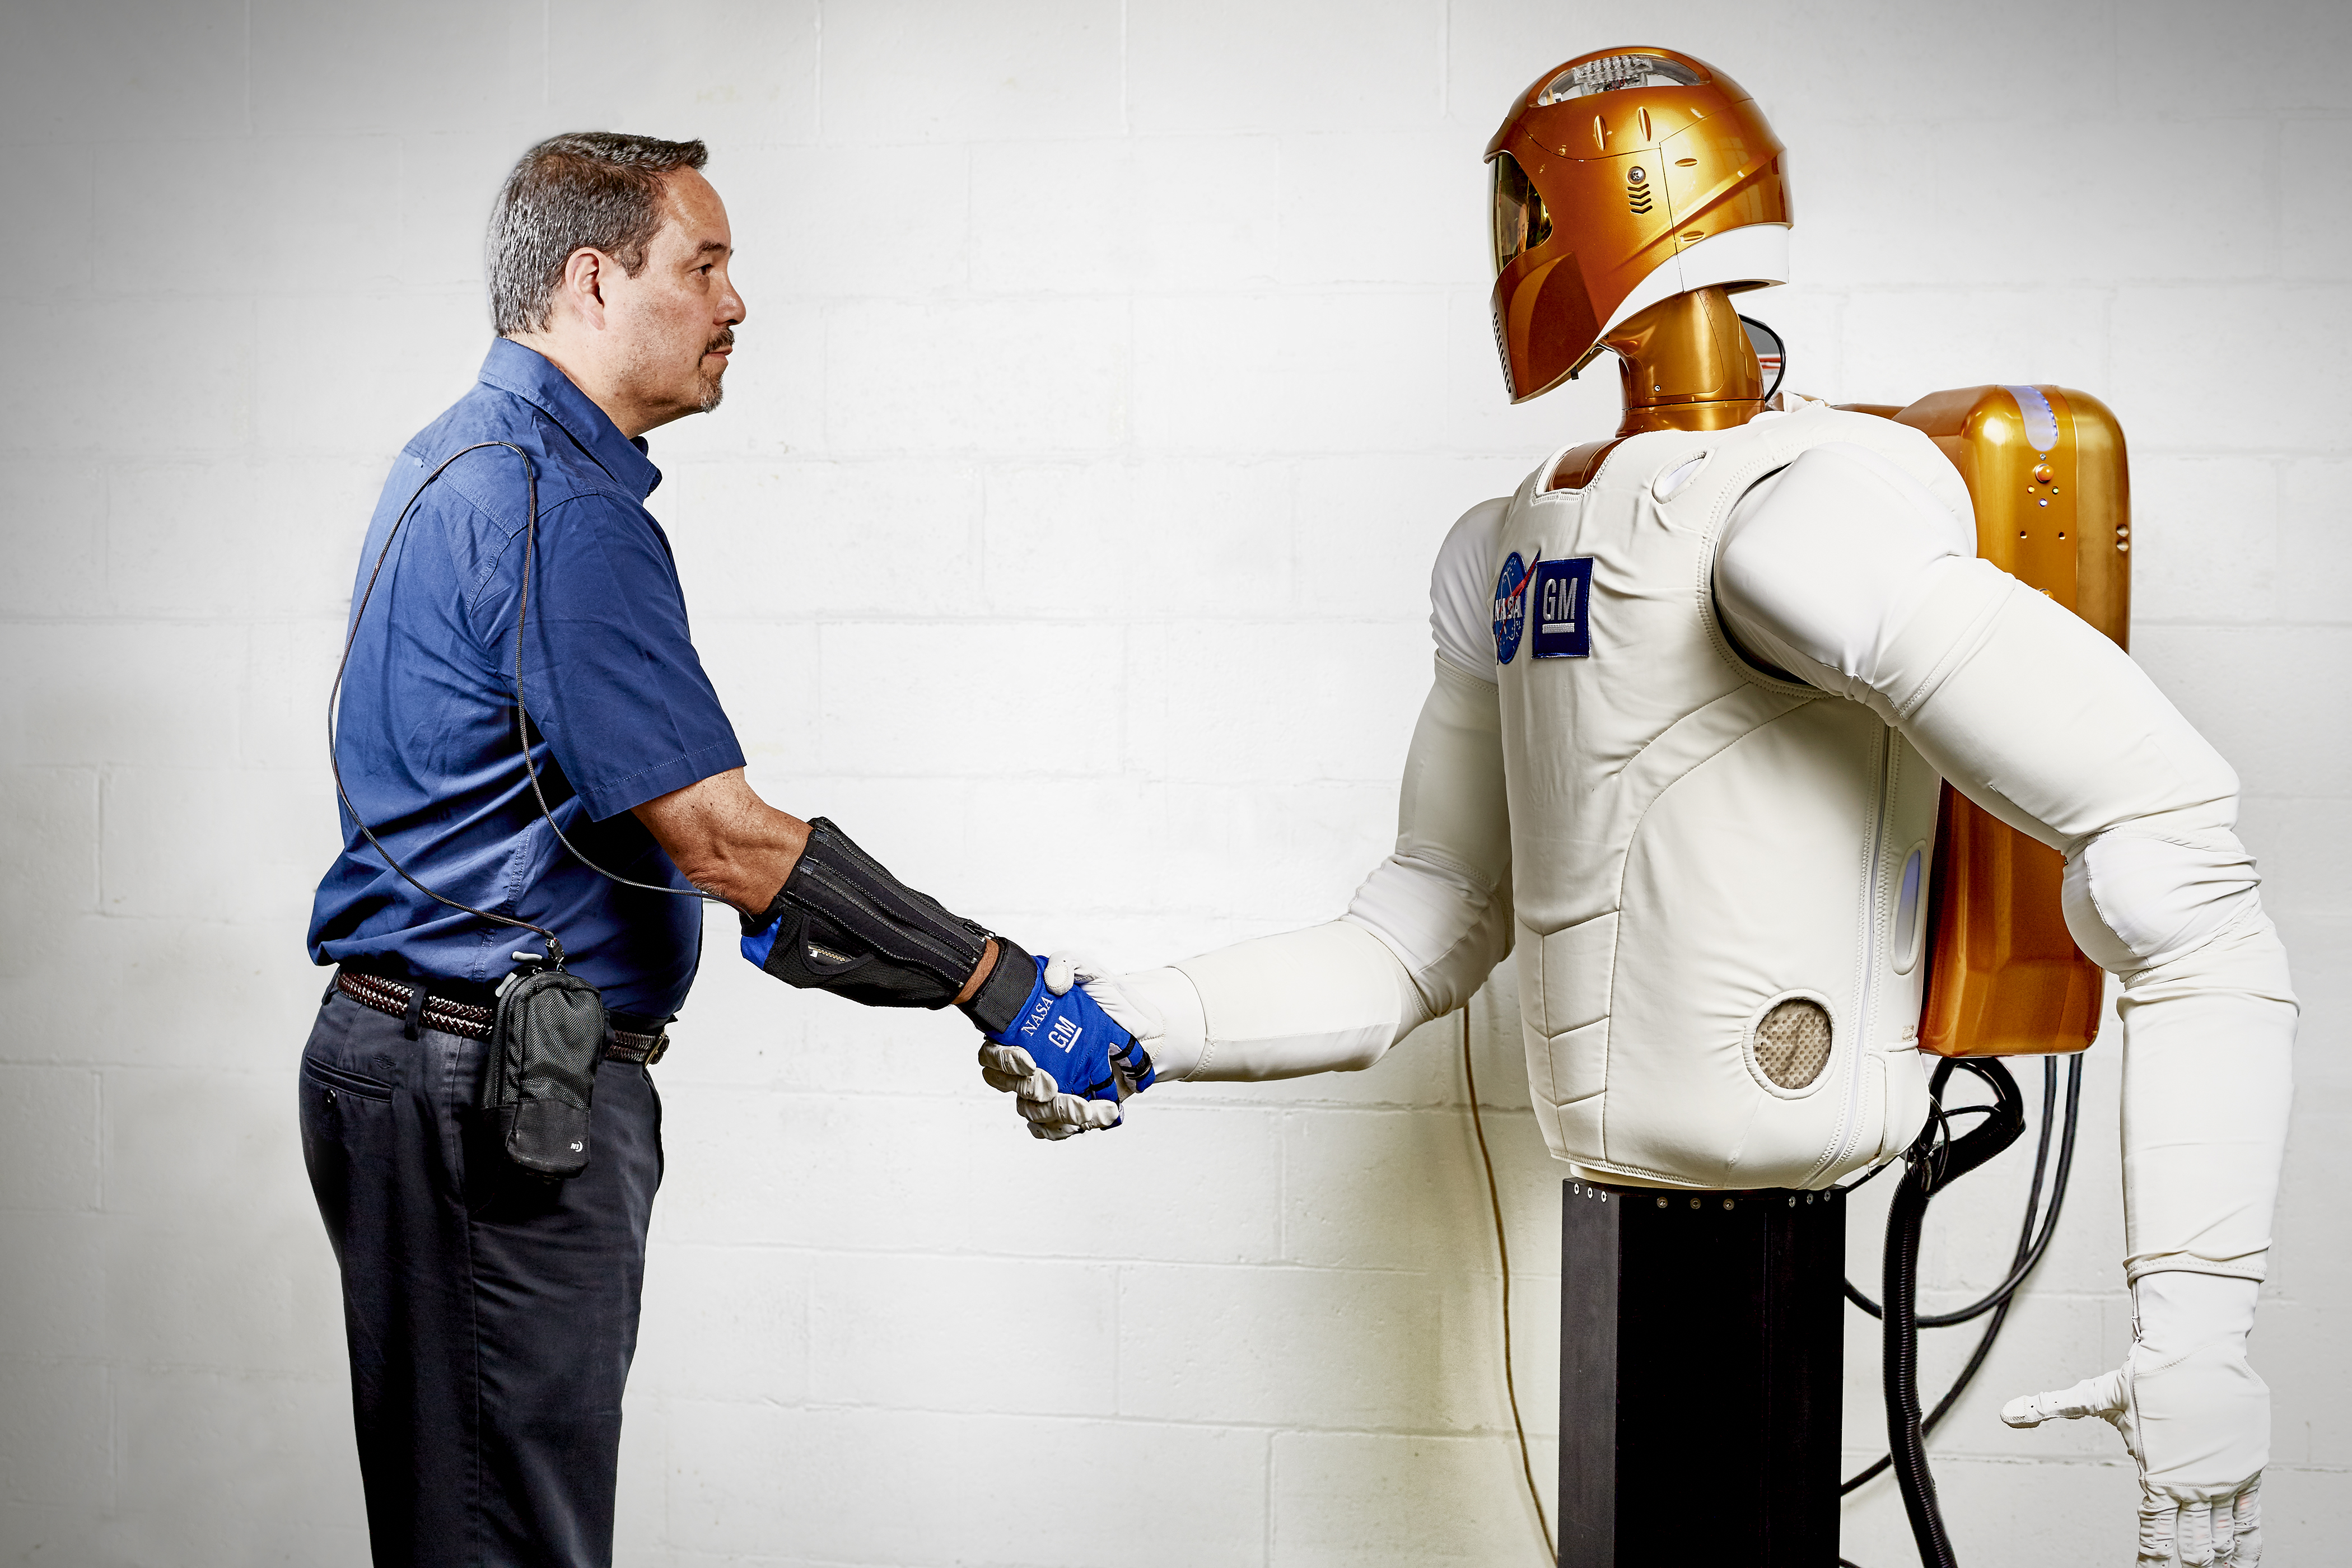 Marty Linn, General Motors manager of advanced technology and principal engineer for robotics, shakes hands with Robonaut 2 (R2), a humanoid robot developed by GM and NASA during a nine-year collaboration that also led to development of the RoboGlove, an exo-muscular device that enhances strength and grip through leading-edge sensors, actuators and tendons that are comparable to the nerves, muscles and tendons in a human hand. GM is licensing the RoboGlove intellectual property to Bioservo Technologies AB, a Swedish medical technologies company that will combine RoboGlove with its owner patented SEM glove technology.